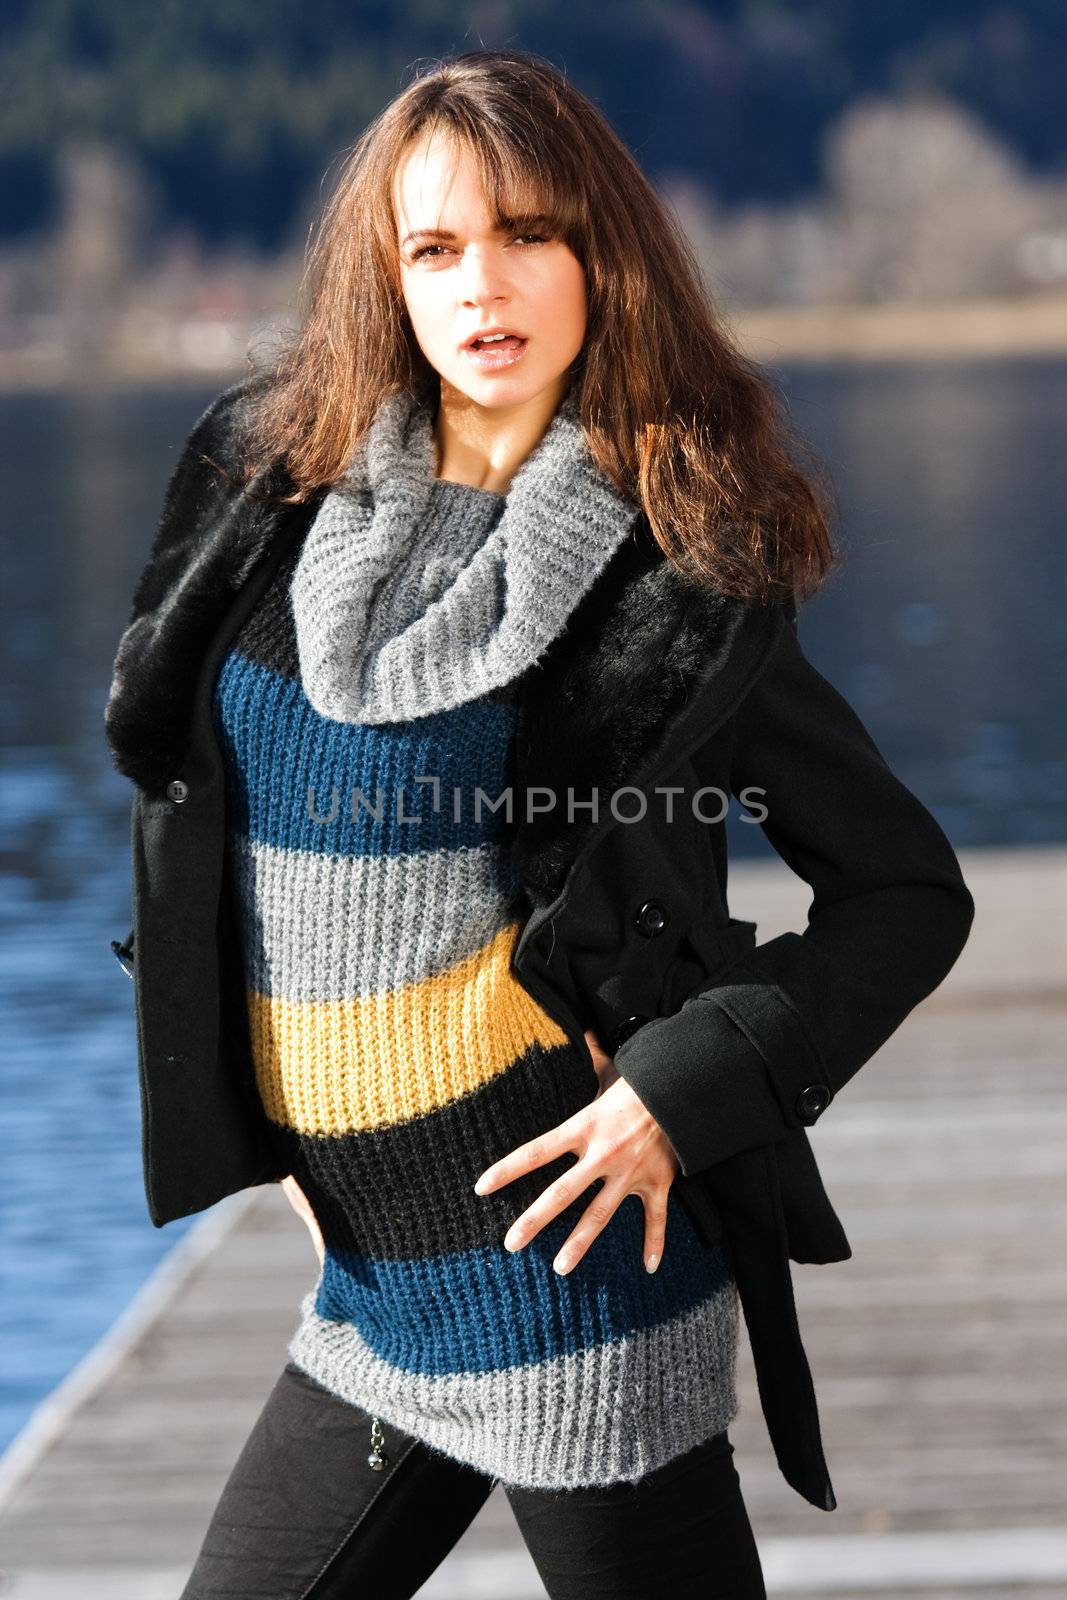 Fall Fashion at the lake by STphotography